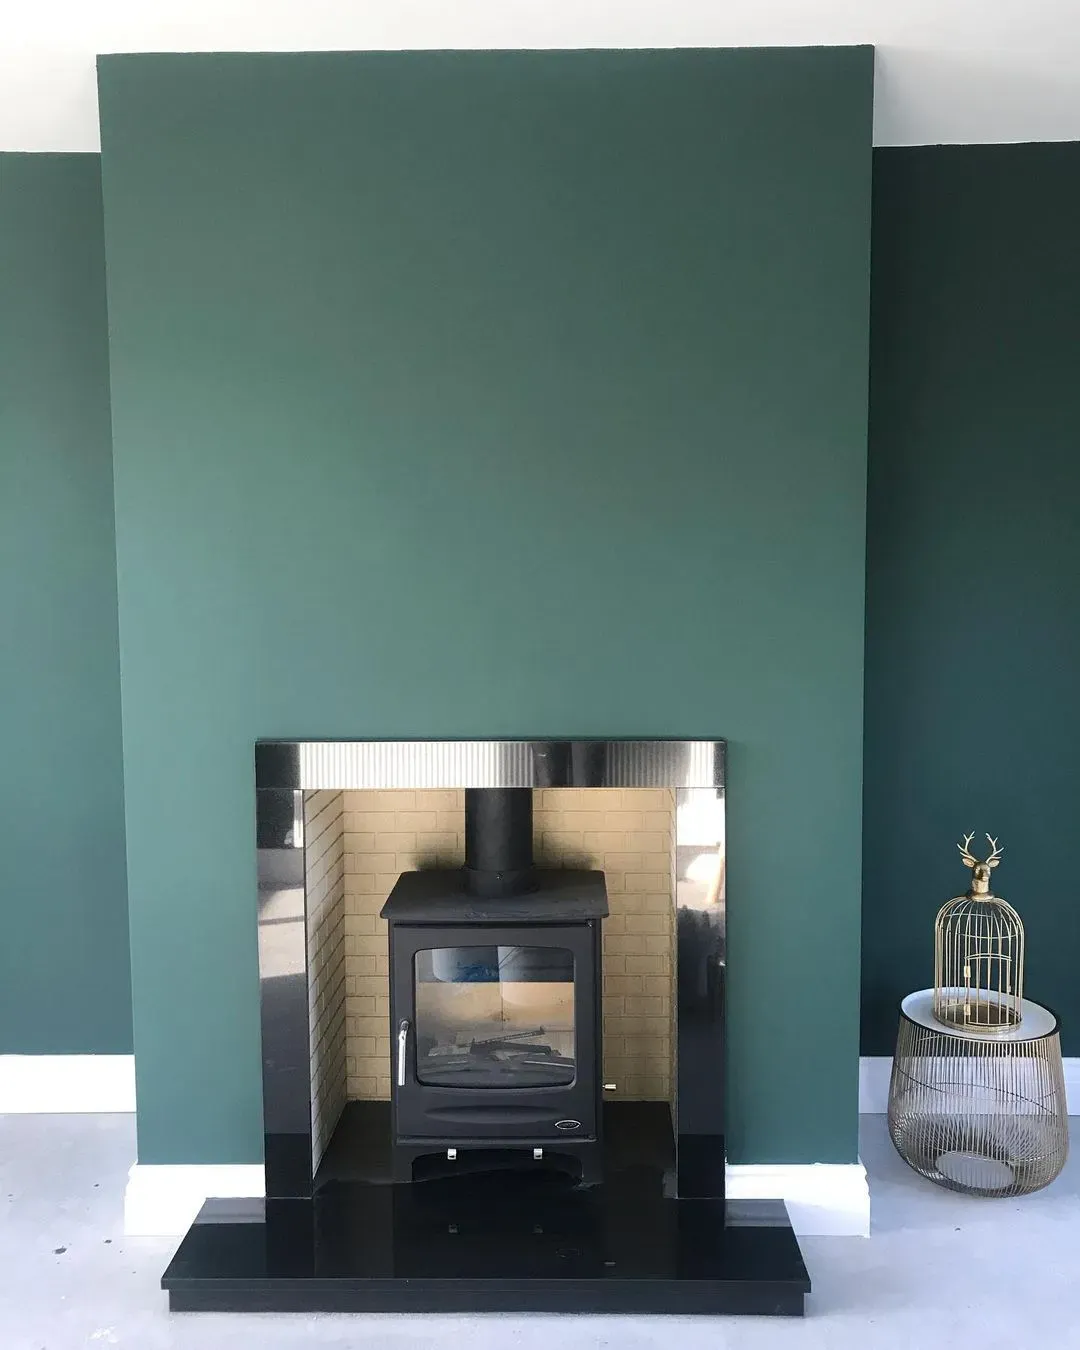 Dulux 07GG 07/143 living room fireplace color review